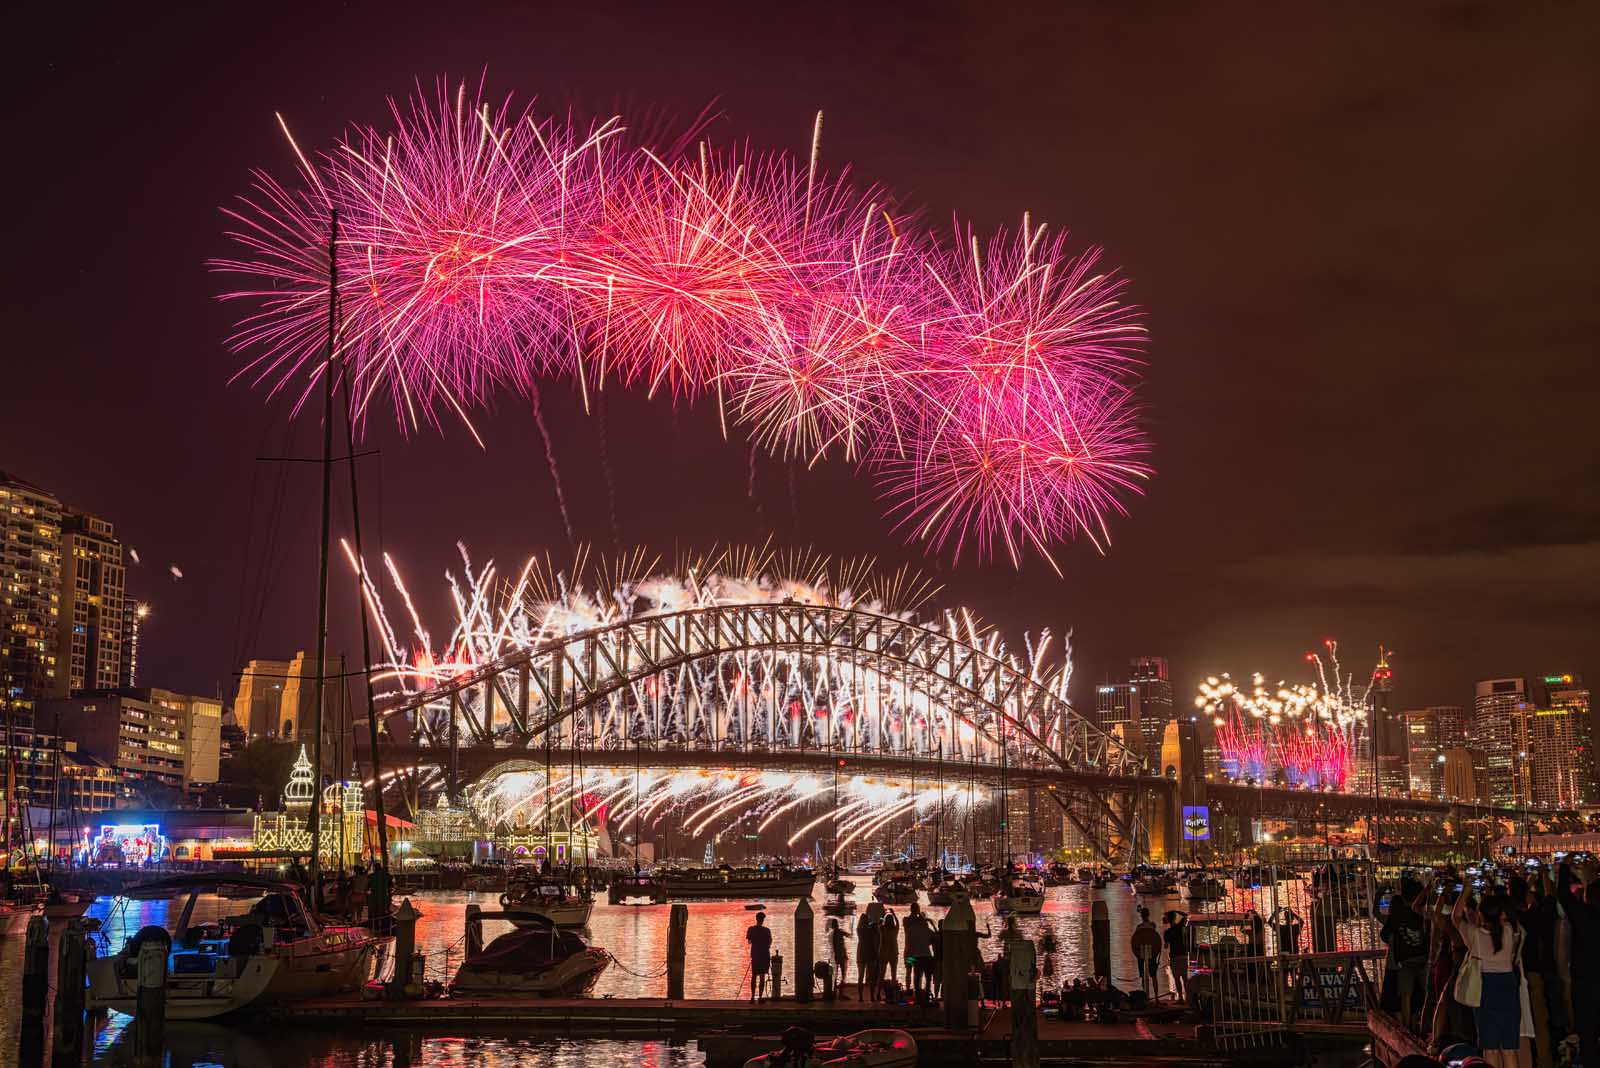 ring in the new year over Australia over the Sydney harbour bridge